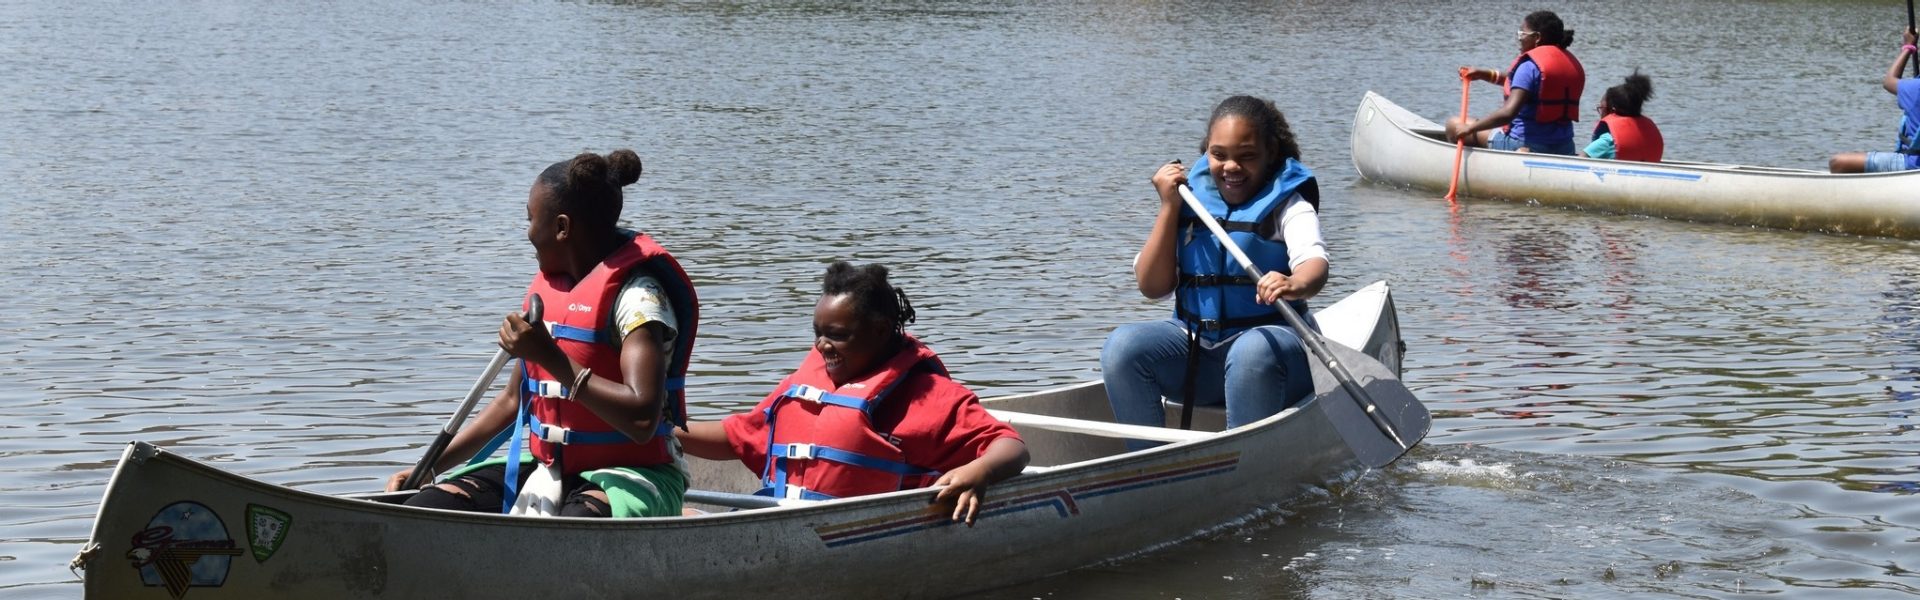  Girl Scouts outdoors at summer camp, laughing together 